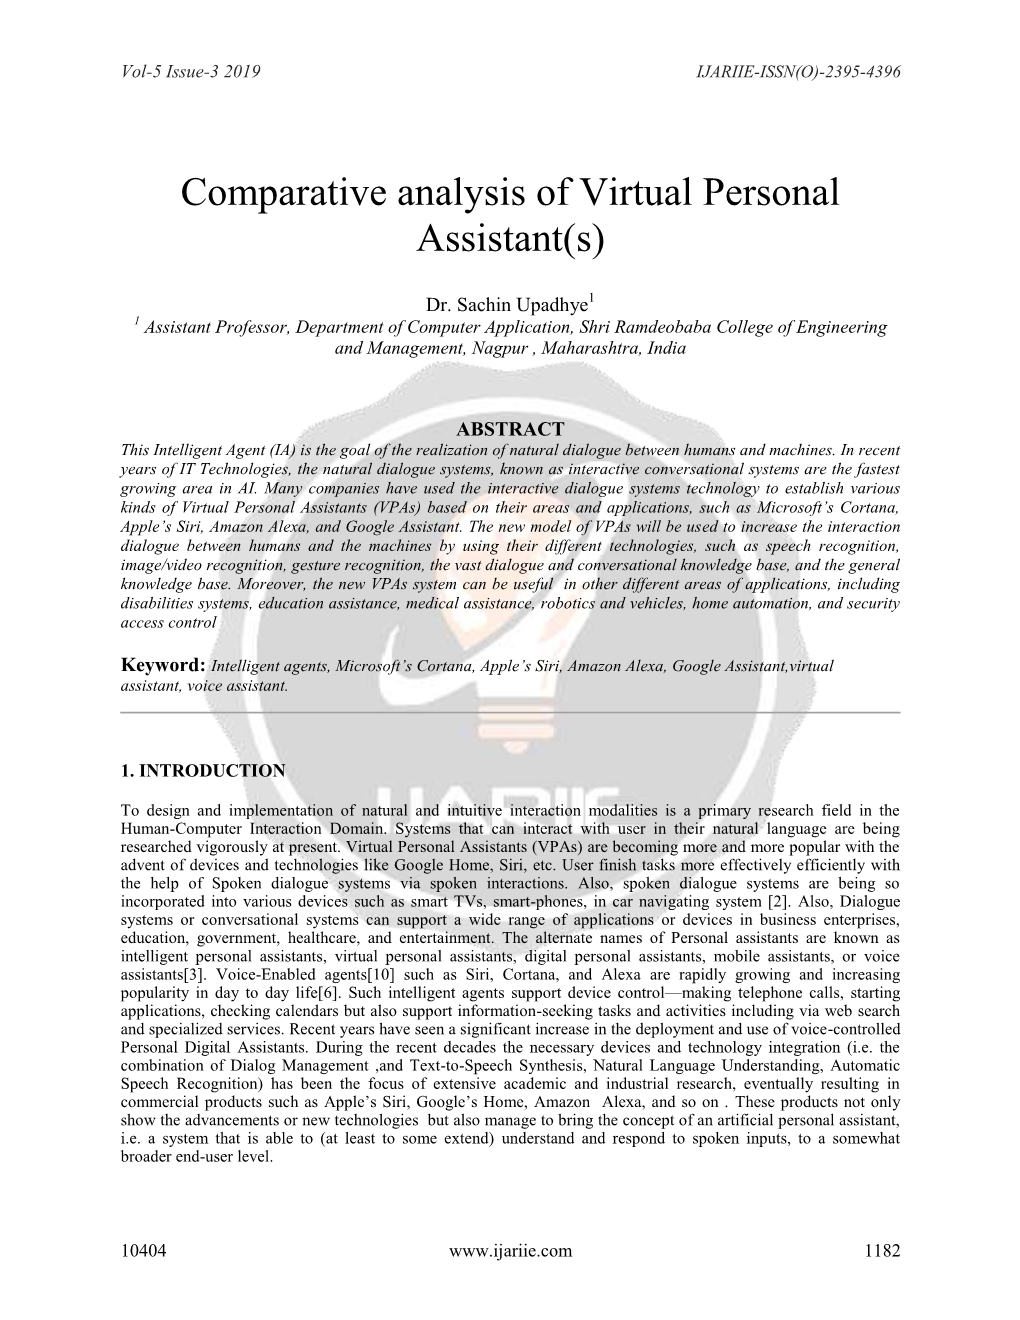 Comparative Analysis of Virtual Personal Assistant(S)